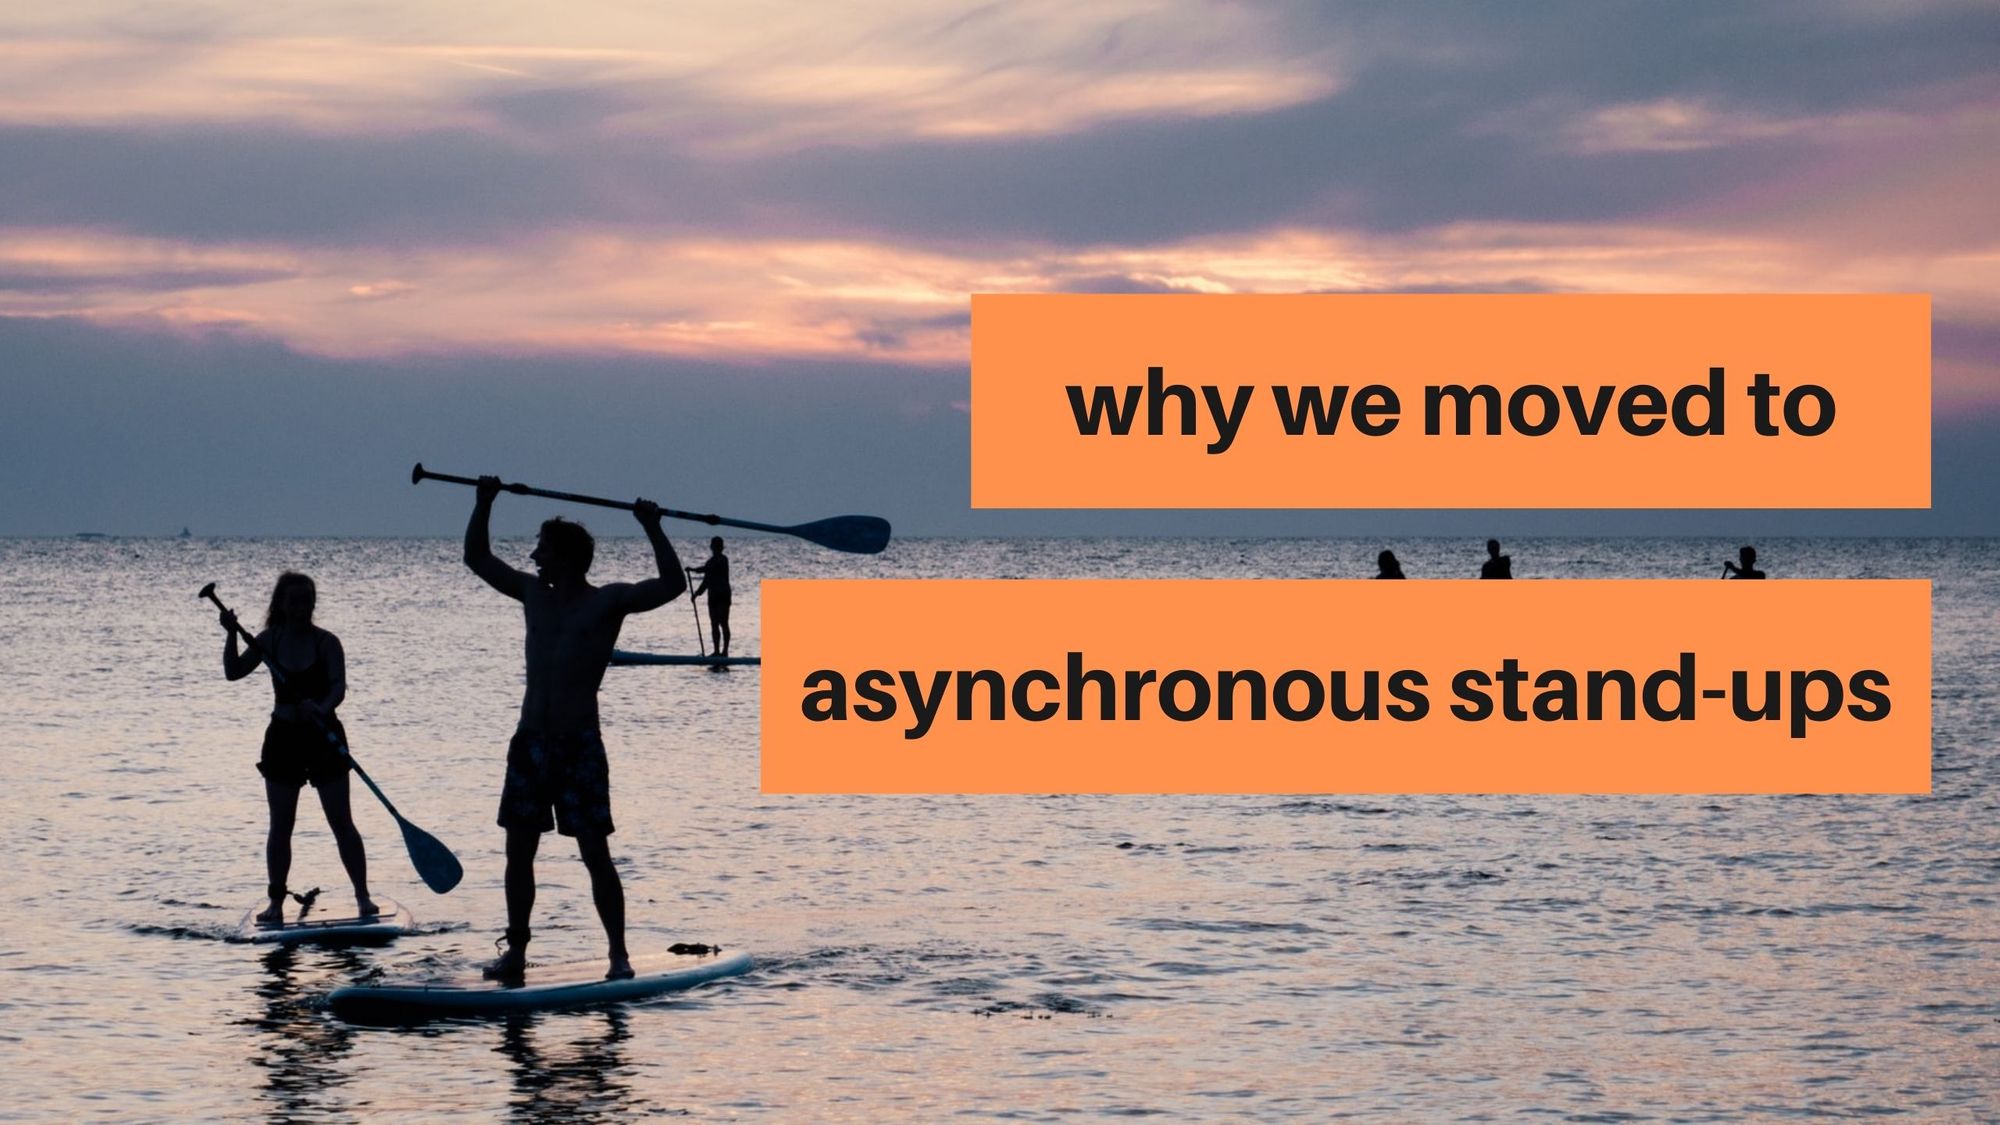 We moved to async stand-ups and never looked back